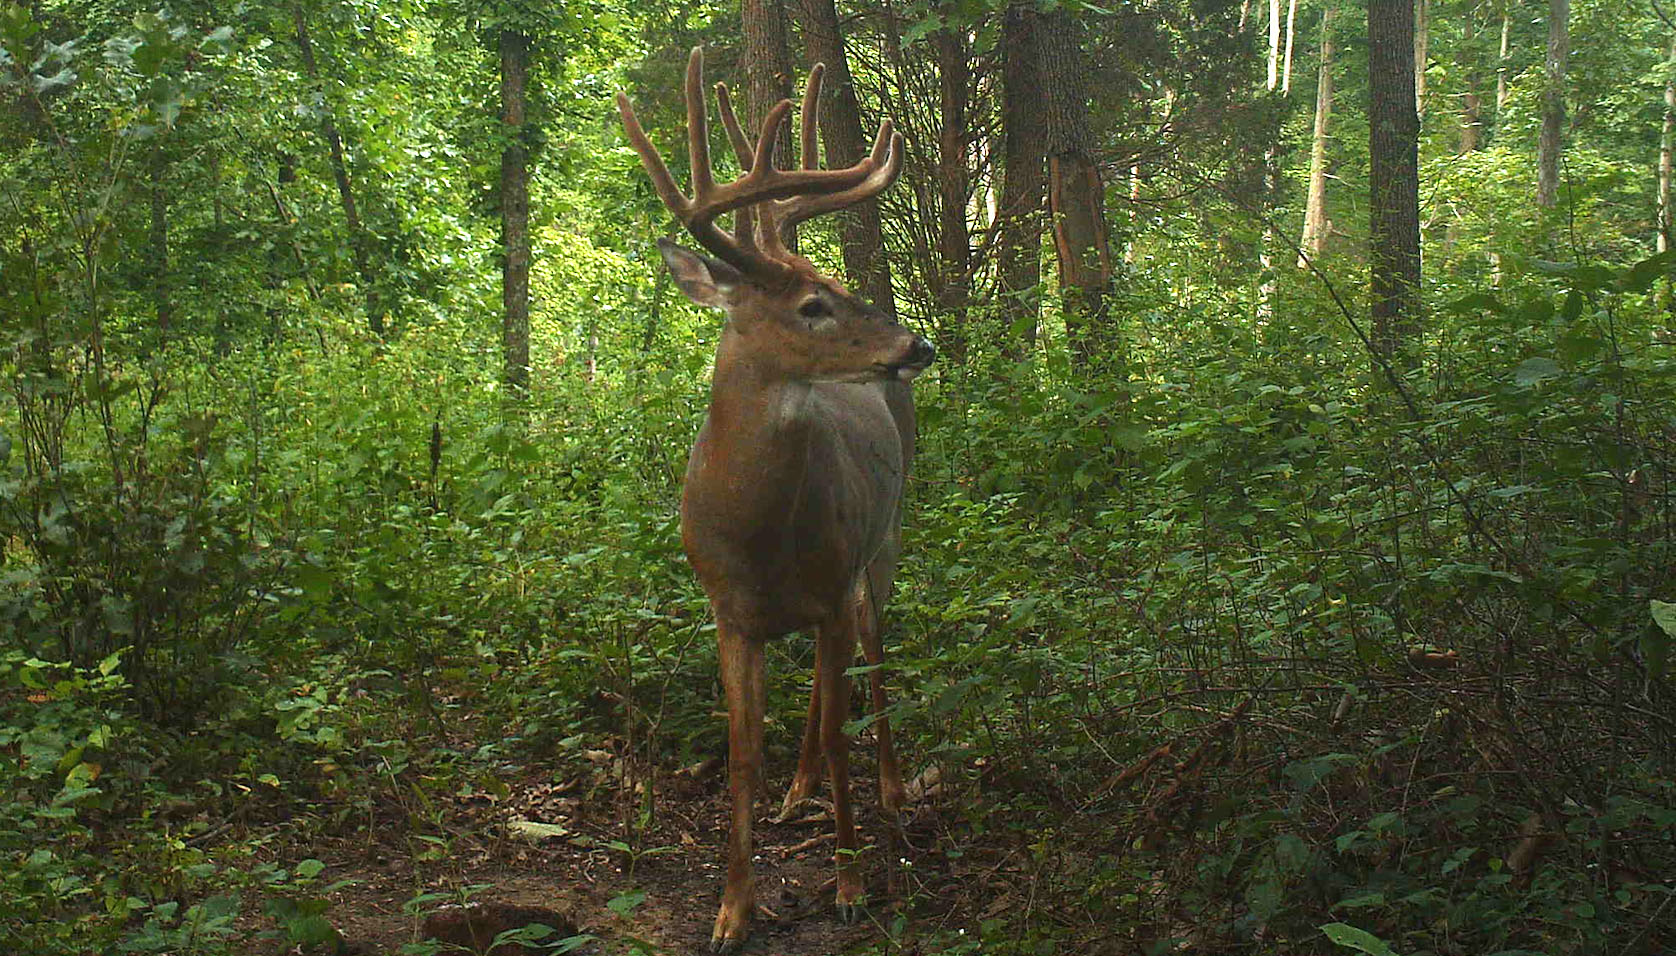 A trail camera photo of a nice, big whitetail buck, with velvet on his antlers, in the middle of green timber with his head turned to the side.